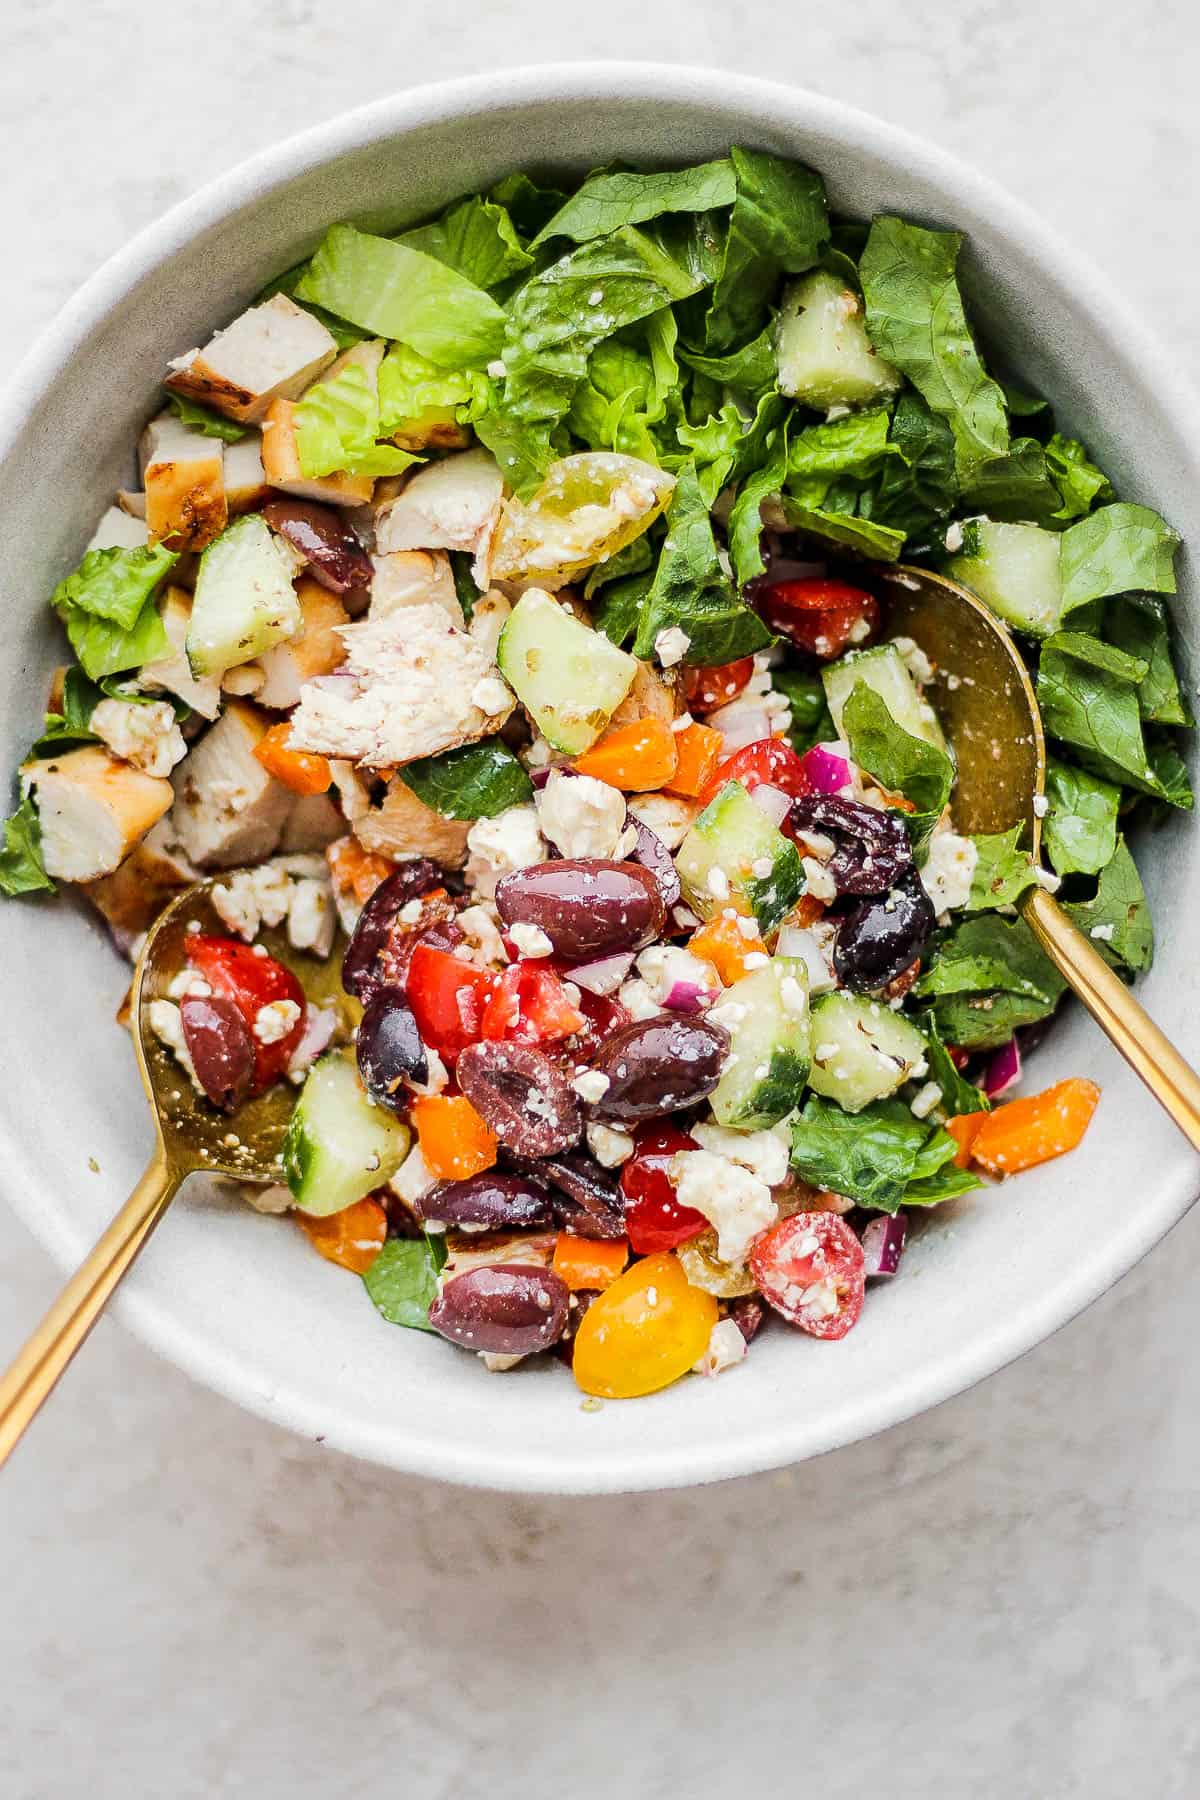 The veggies, romaine lettuce, chicken, and dressing all combined in a bowl.